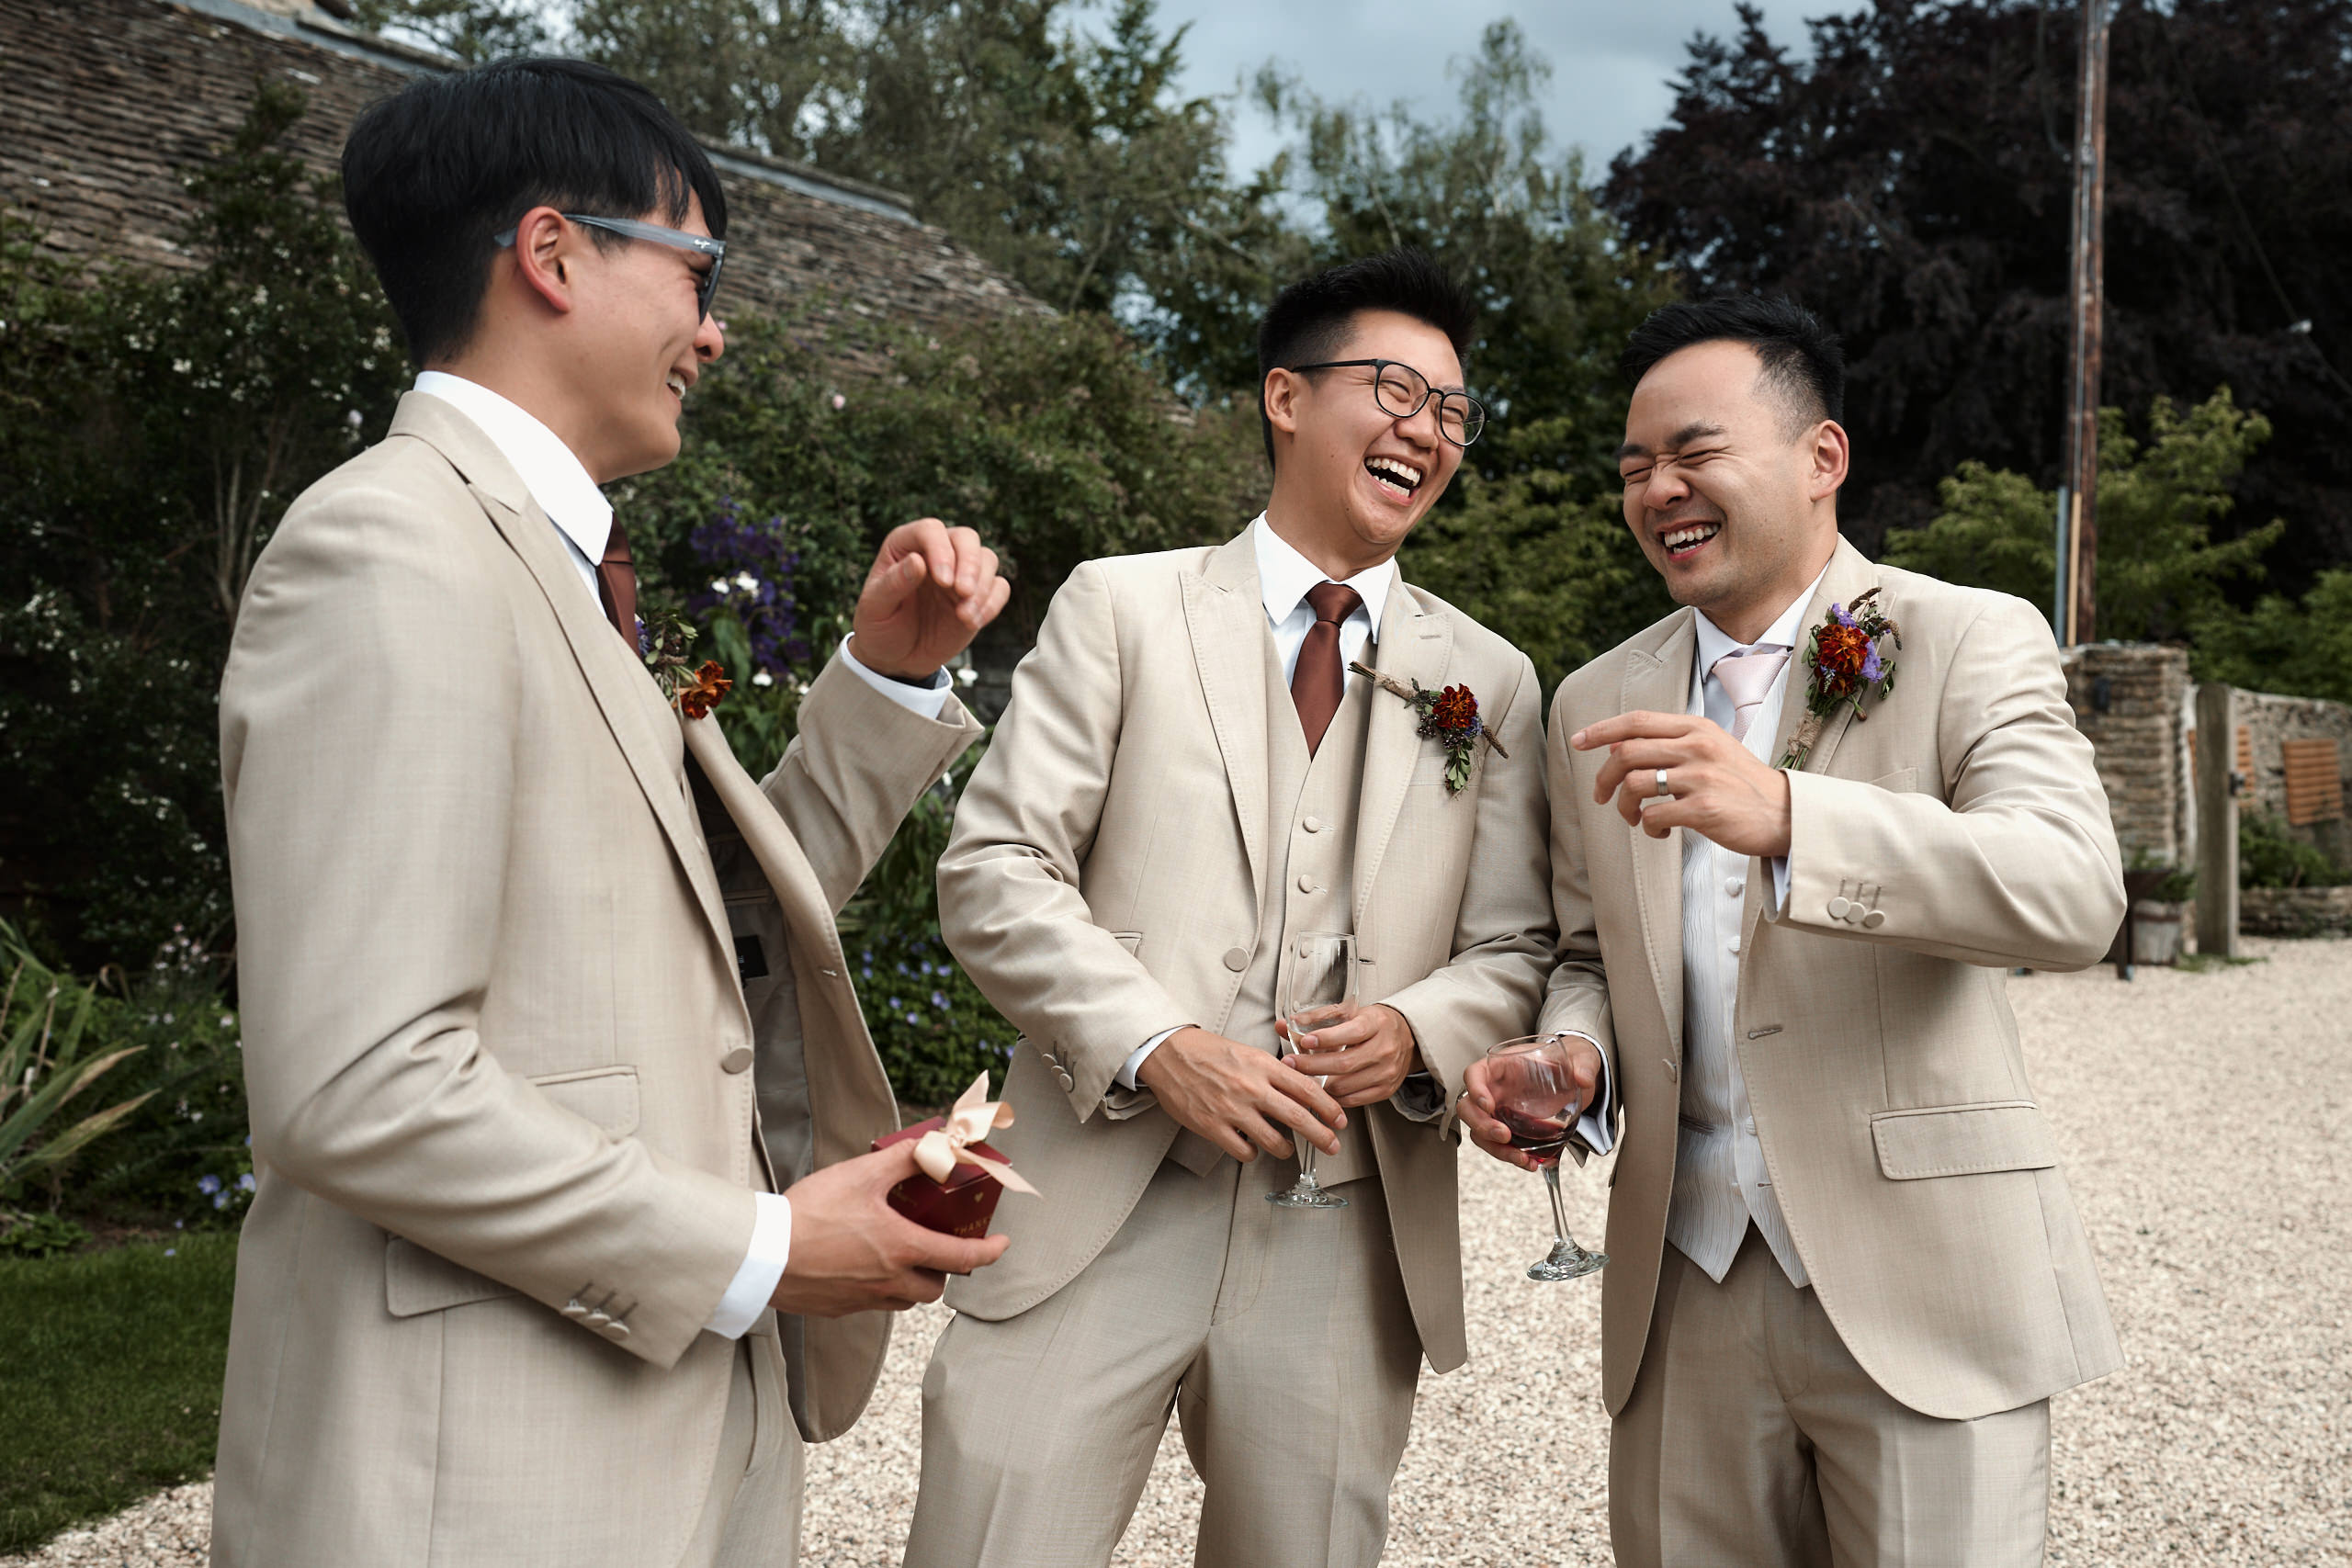 A bunch of guys in beige suits having a laugh.